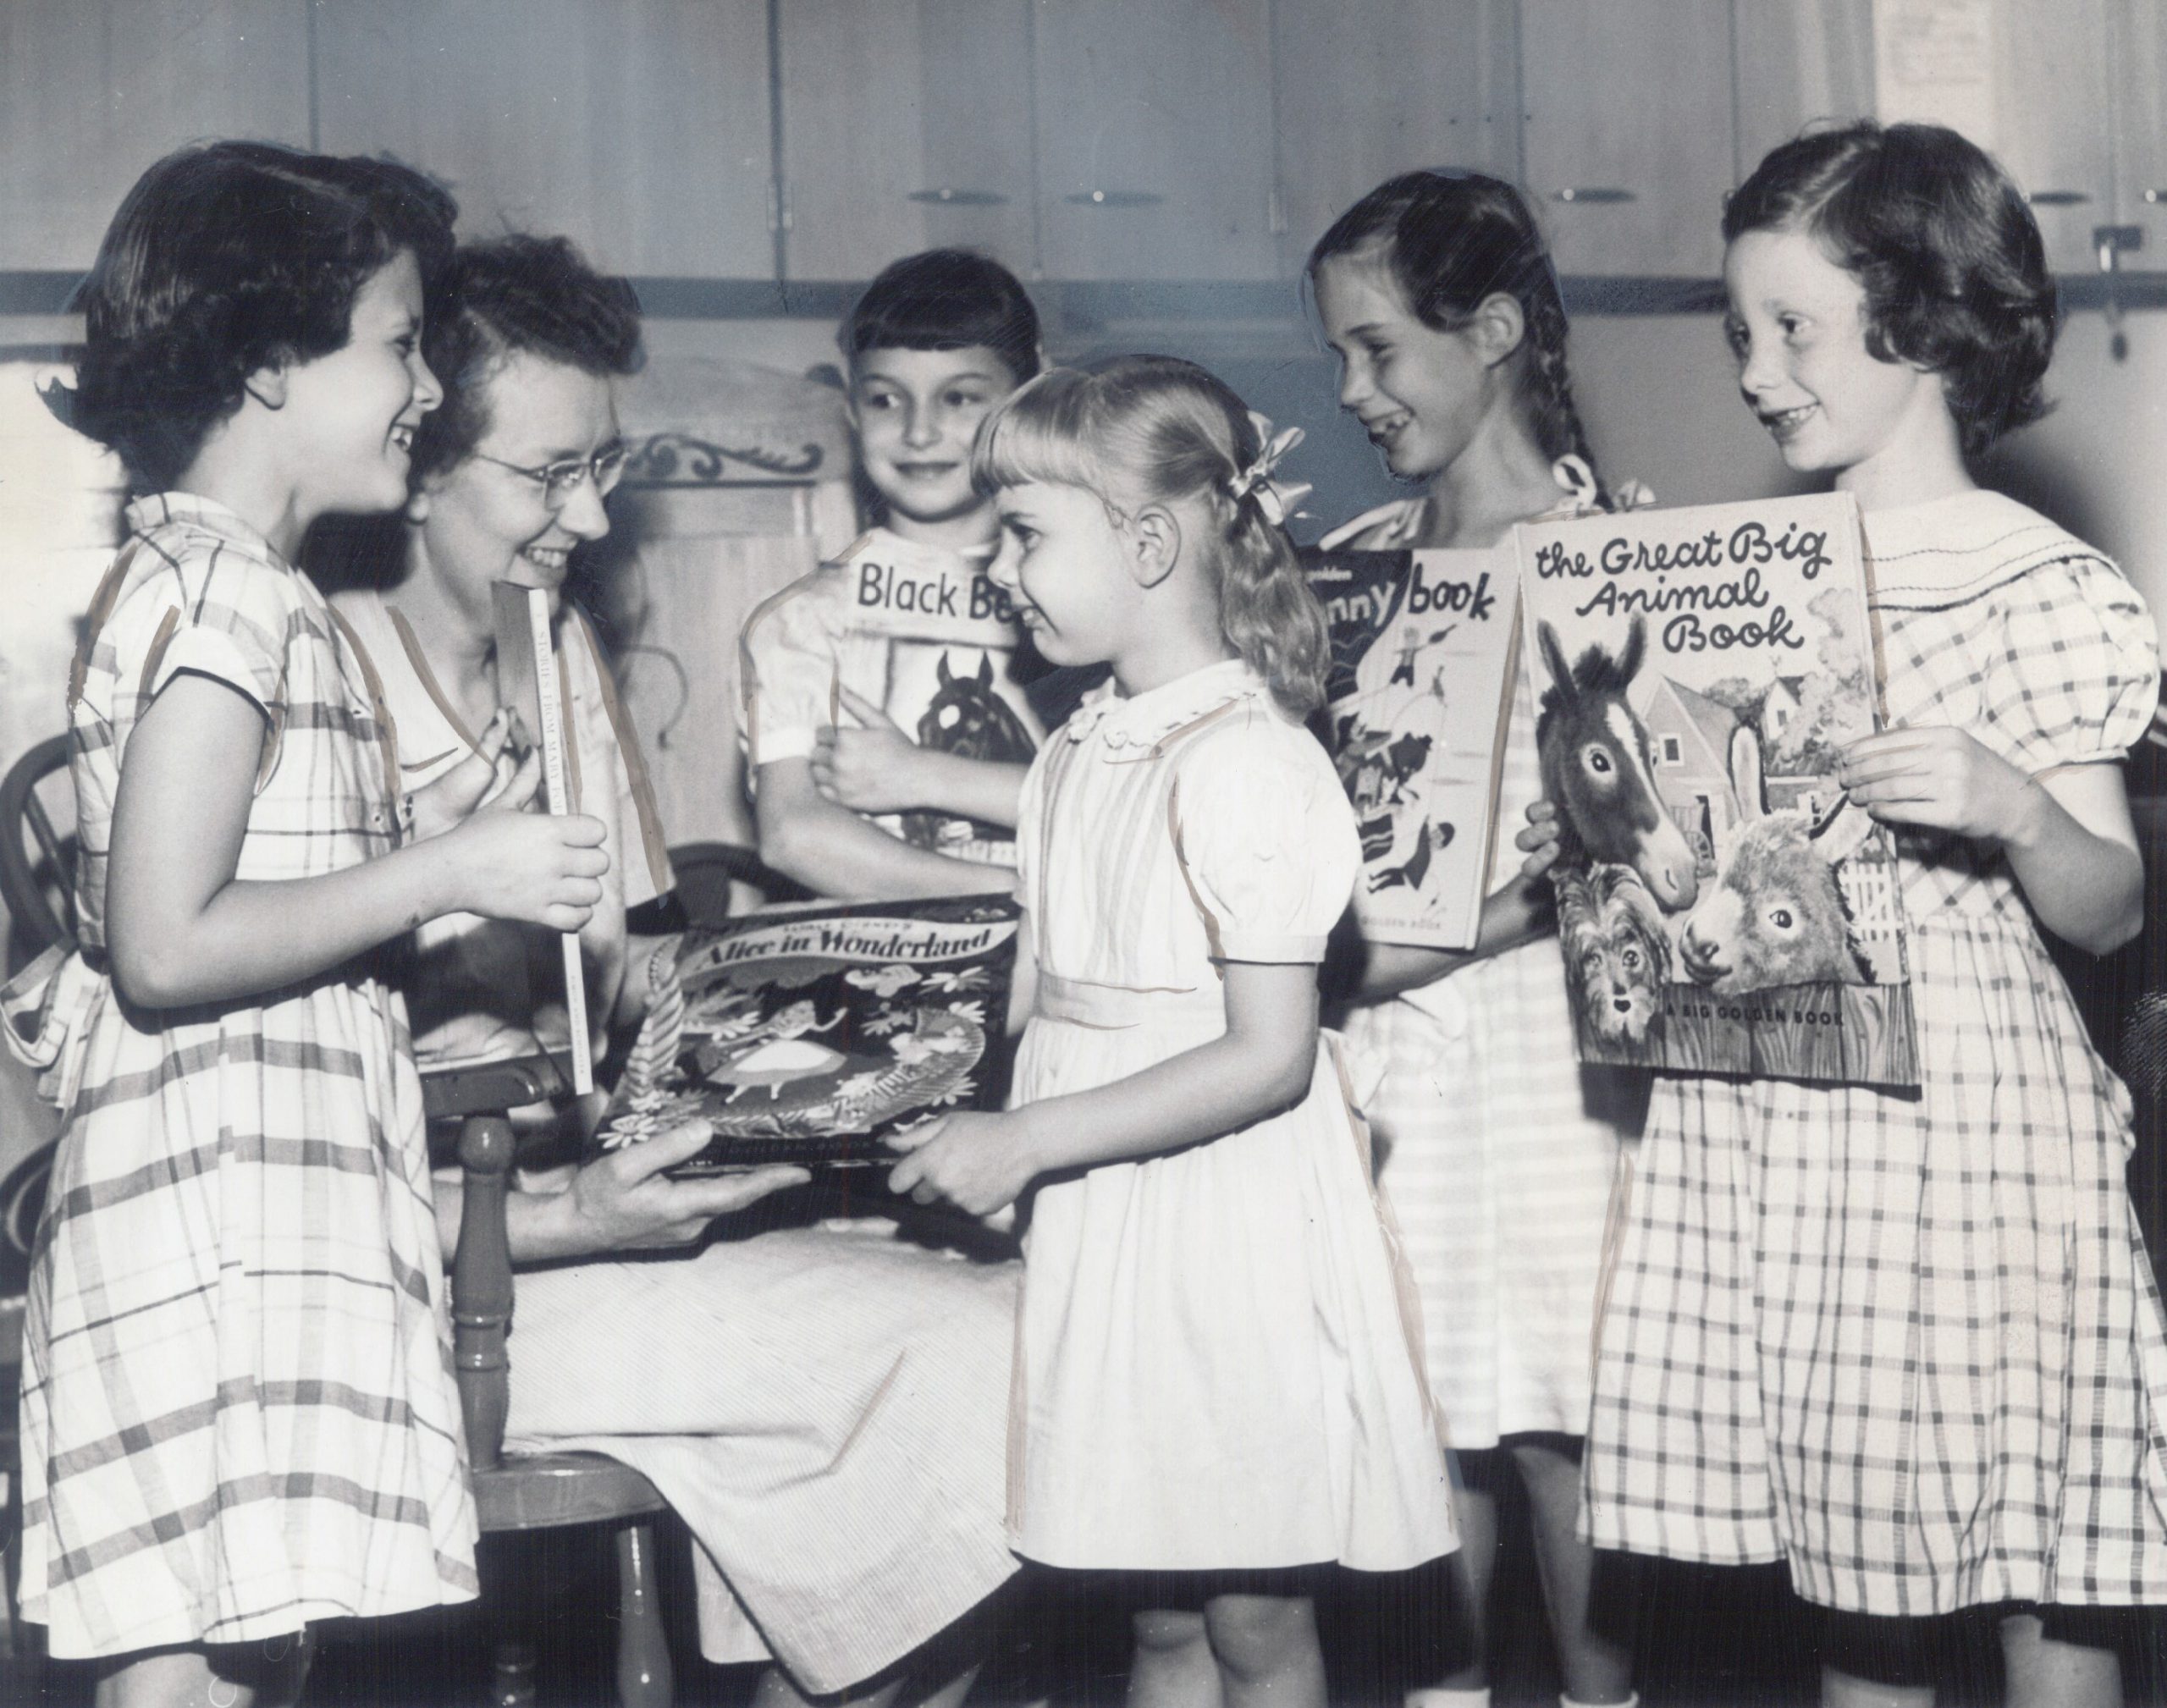 Eleanor Sackett accepts book donations from a group of girls.